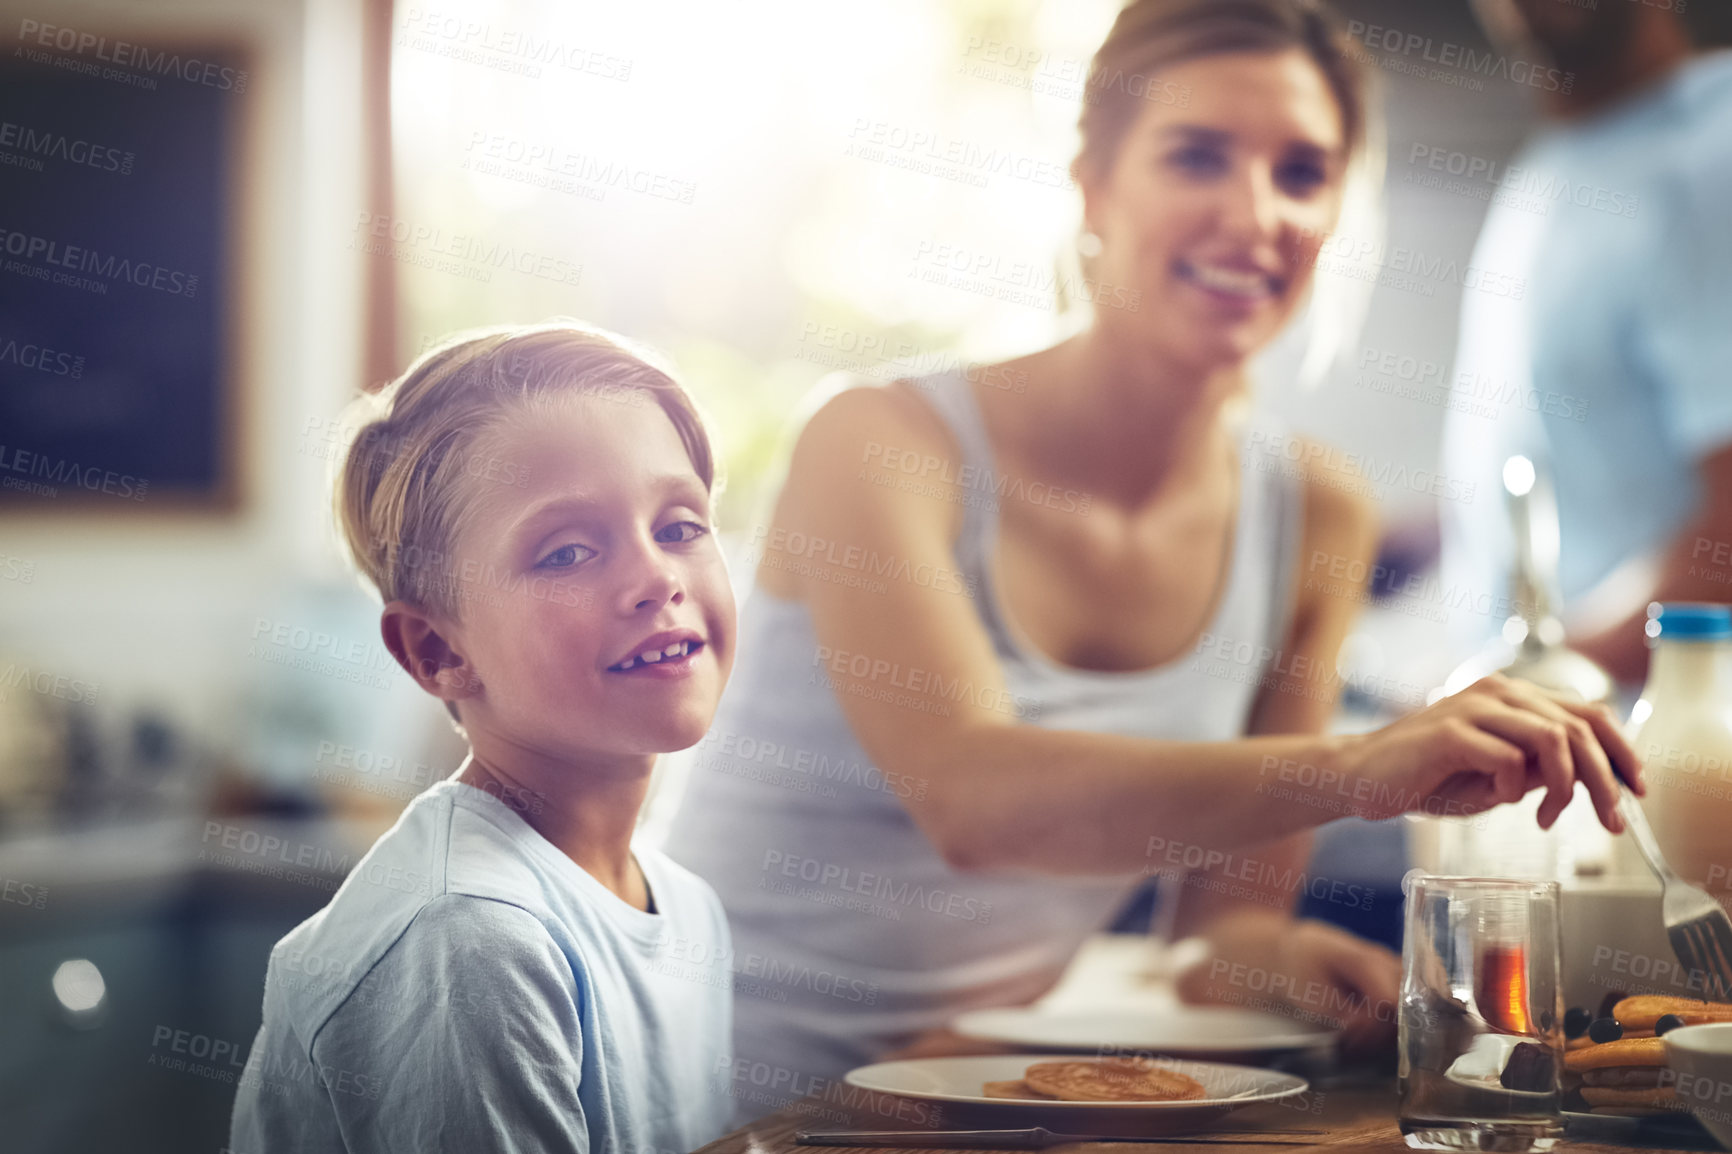 Buy stock photo Cropped shot of a little boy having breakfast with his mom sitting in the background